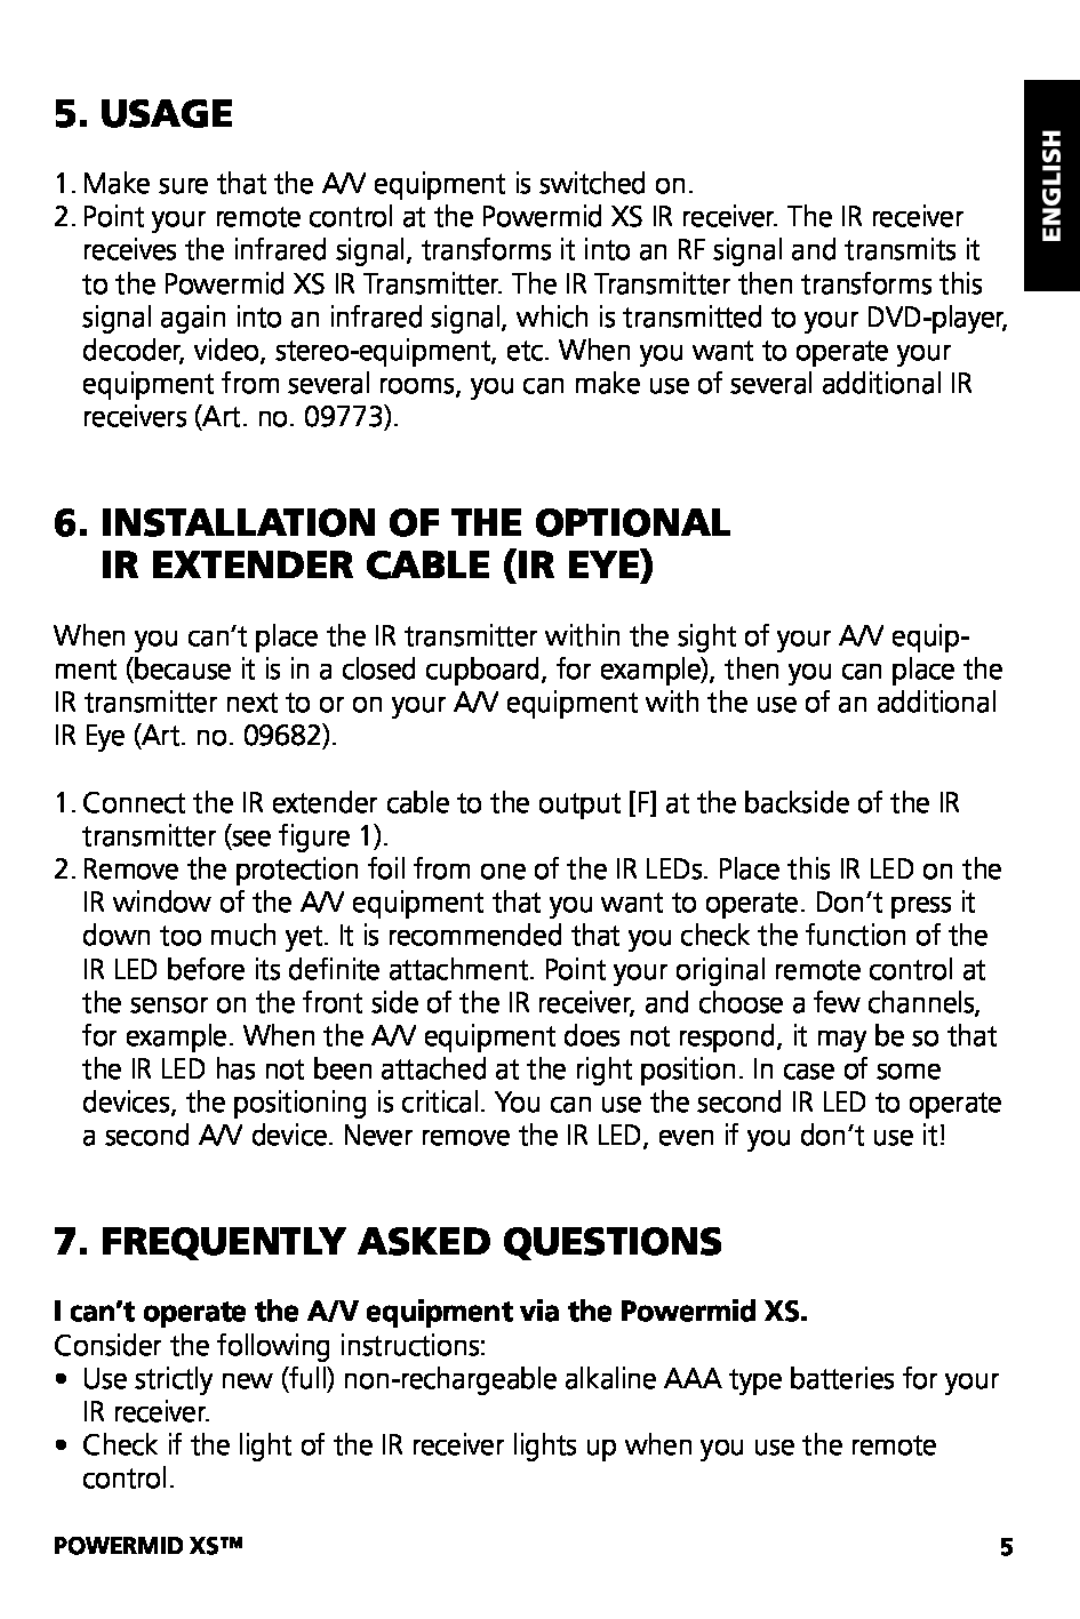 Marmitek XS user manual Usage, Installation Of The Optional Ir Extender Cable Ir Eye, Frequently Asked Questions 